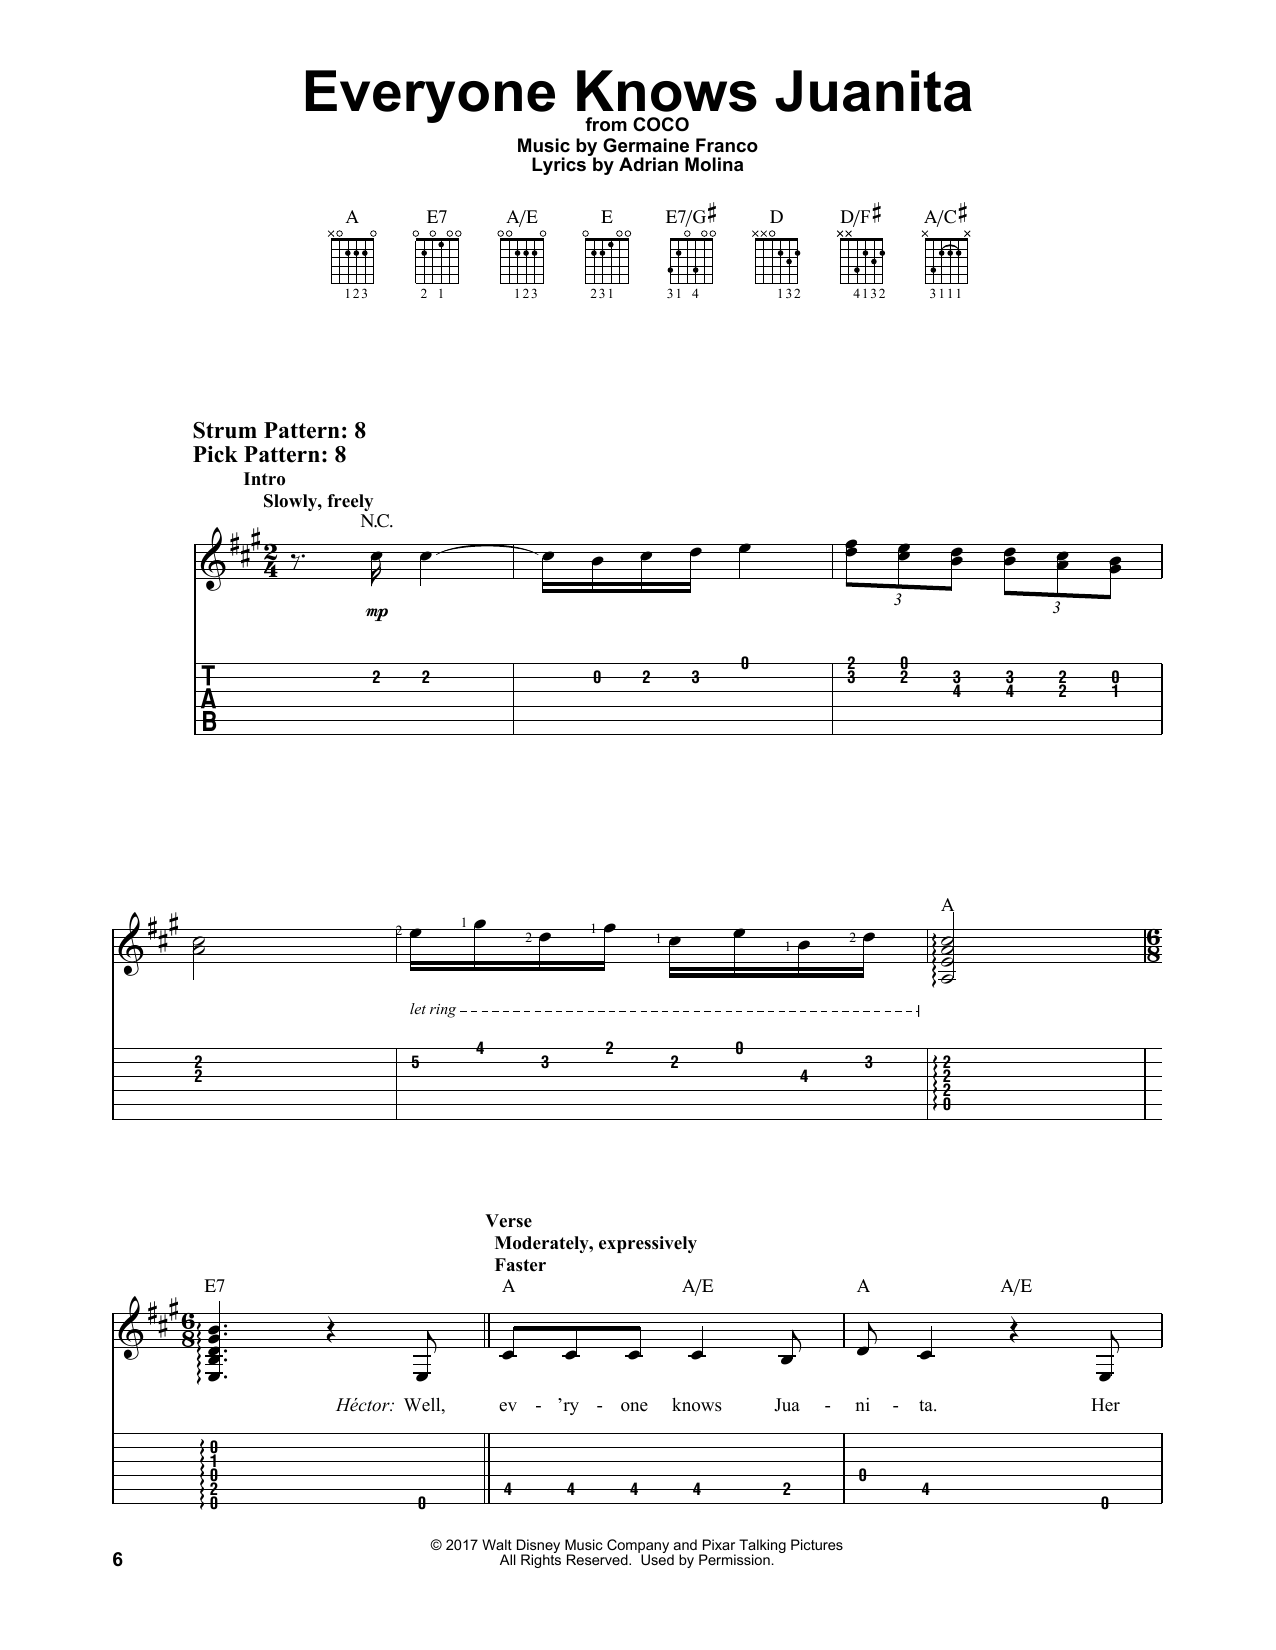 Download Germaine Franco & Adrian Molina Everyone Knows Juanita (from Coco) Sheet Music